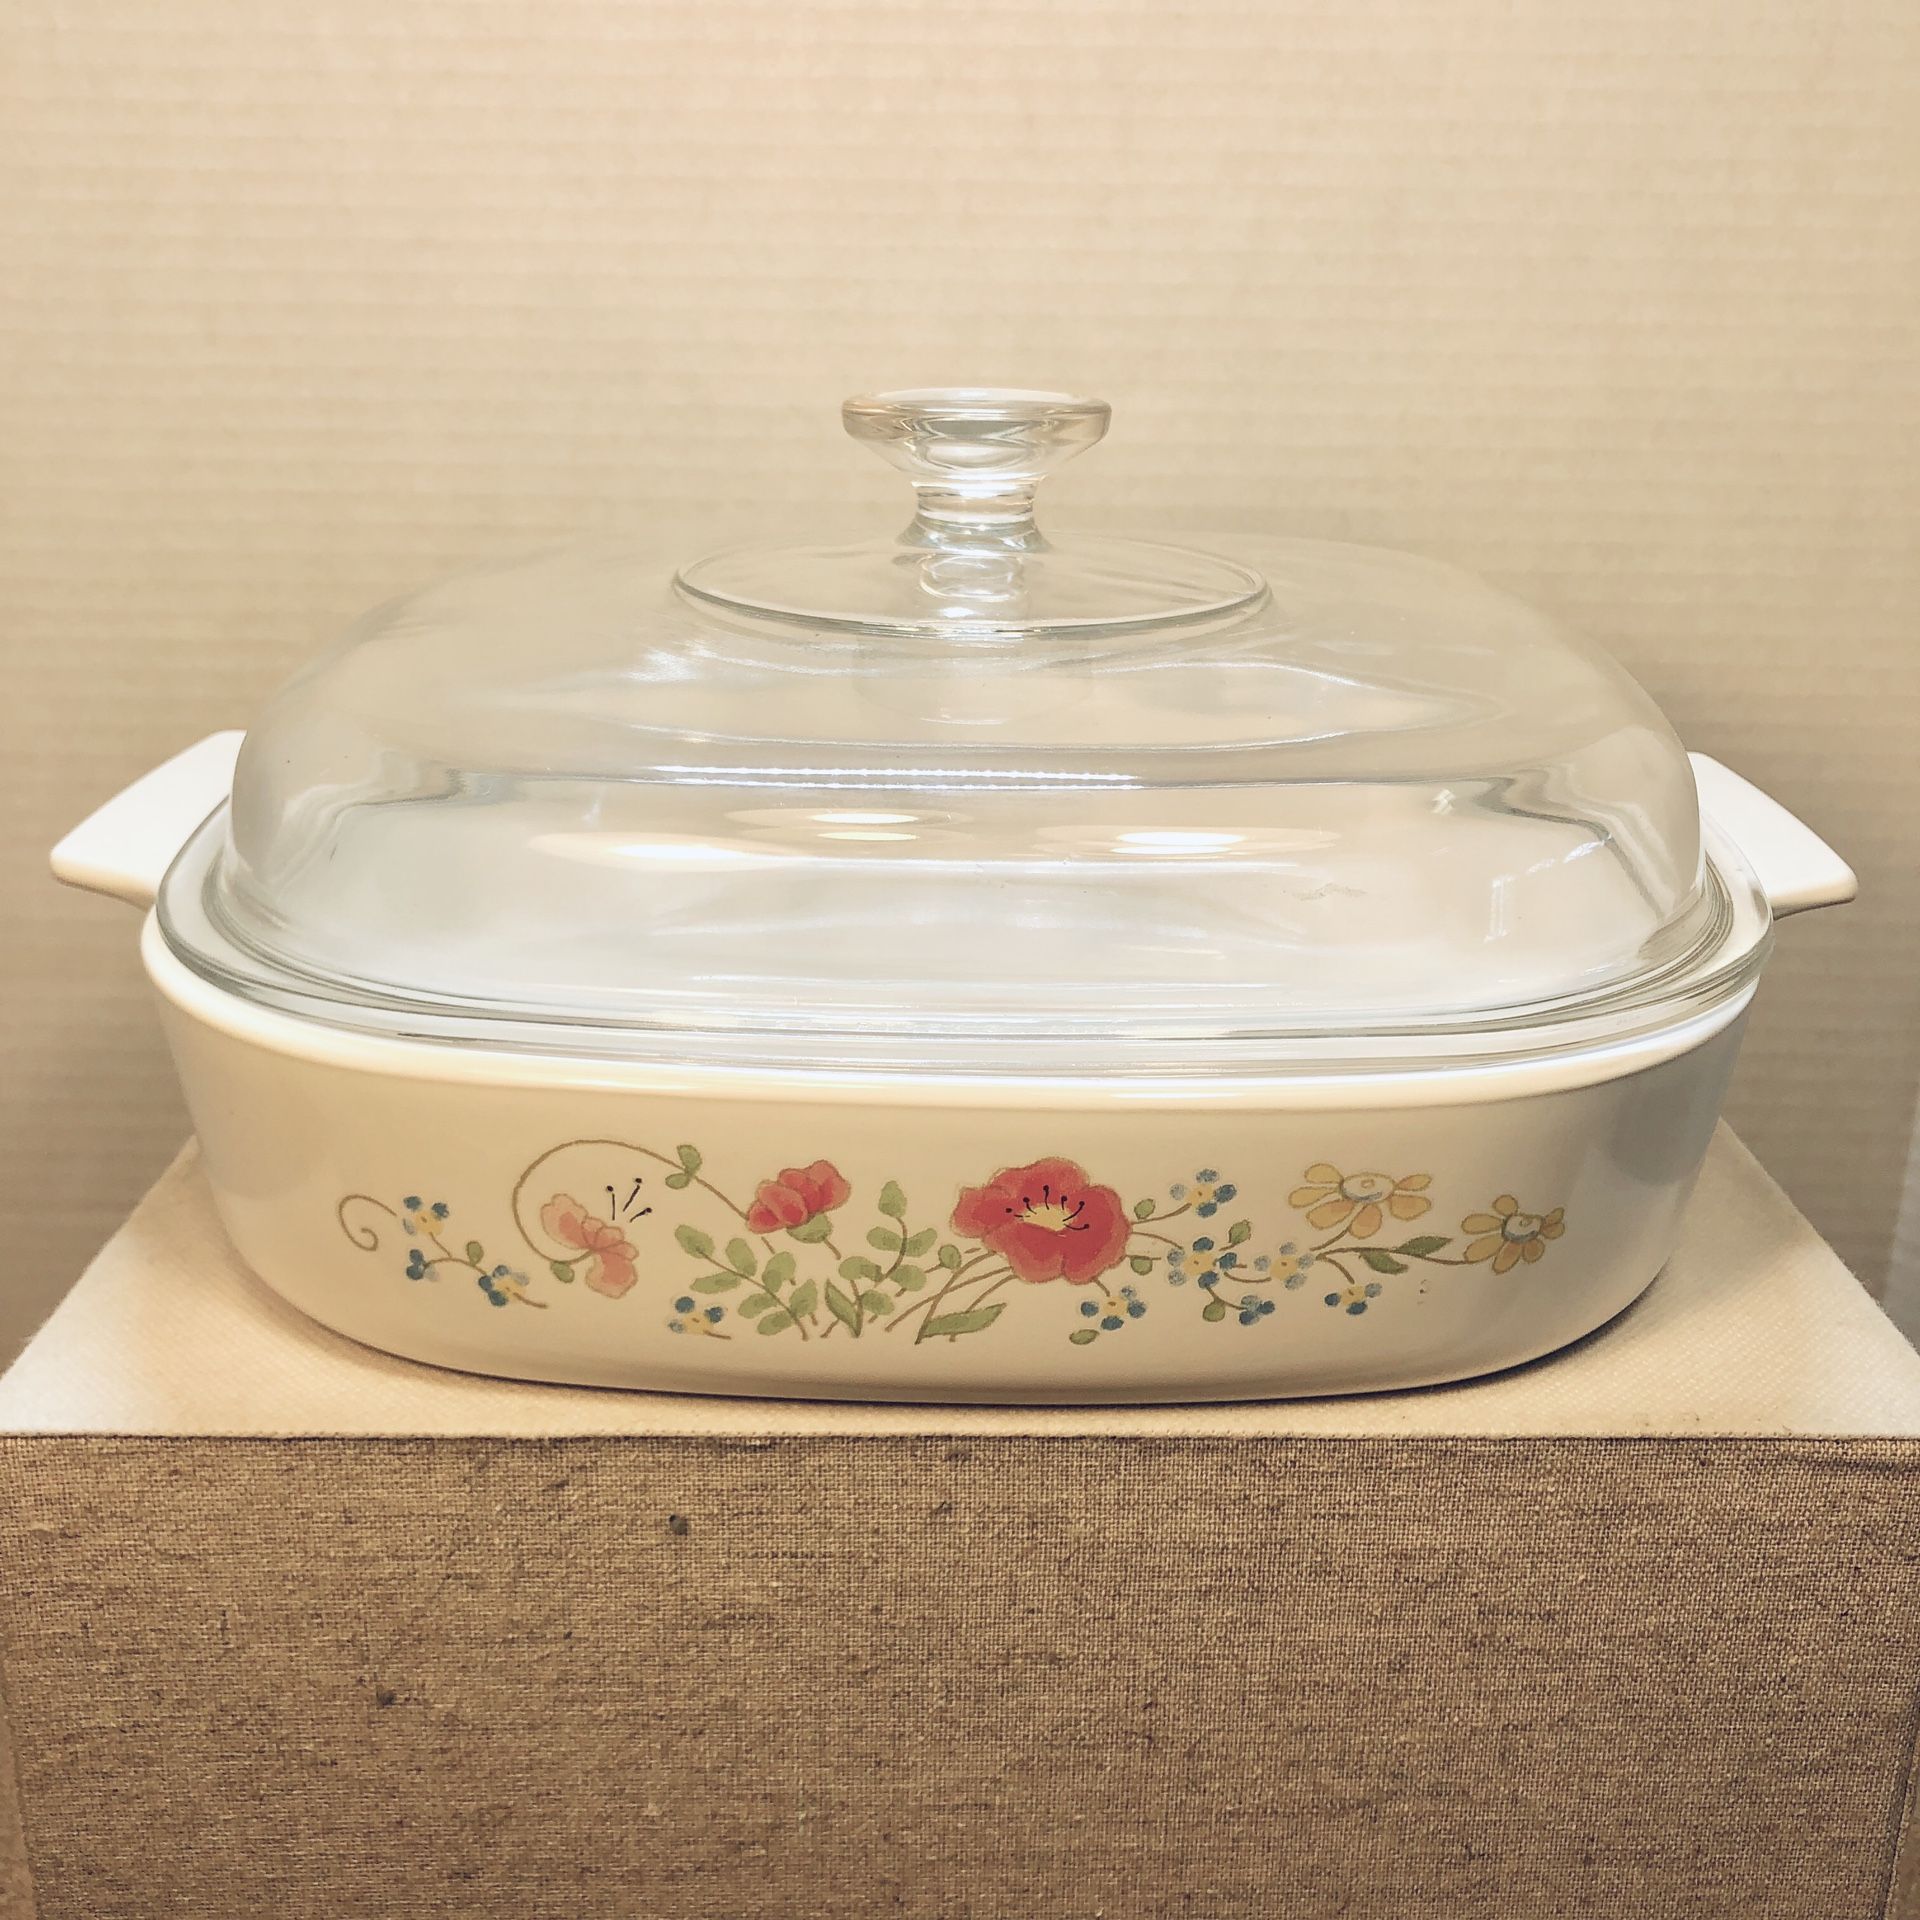 Vintage Corning Ware A-10-B Casserole Dish Wildflower Poppy with Glass Pyrex Lid